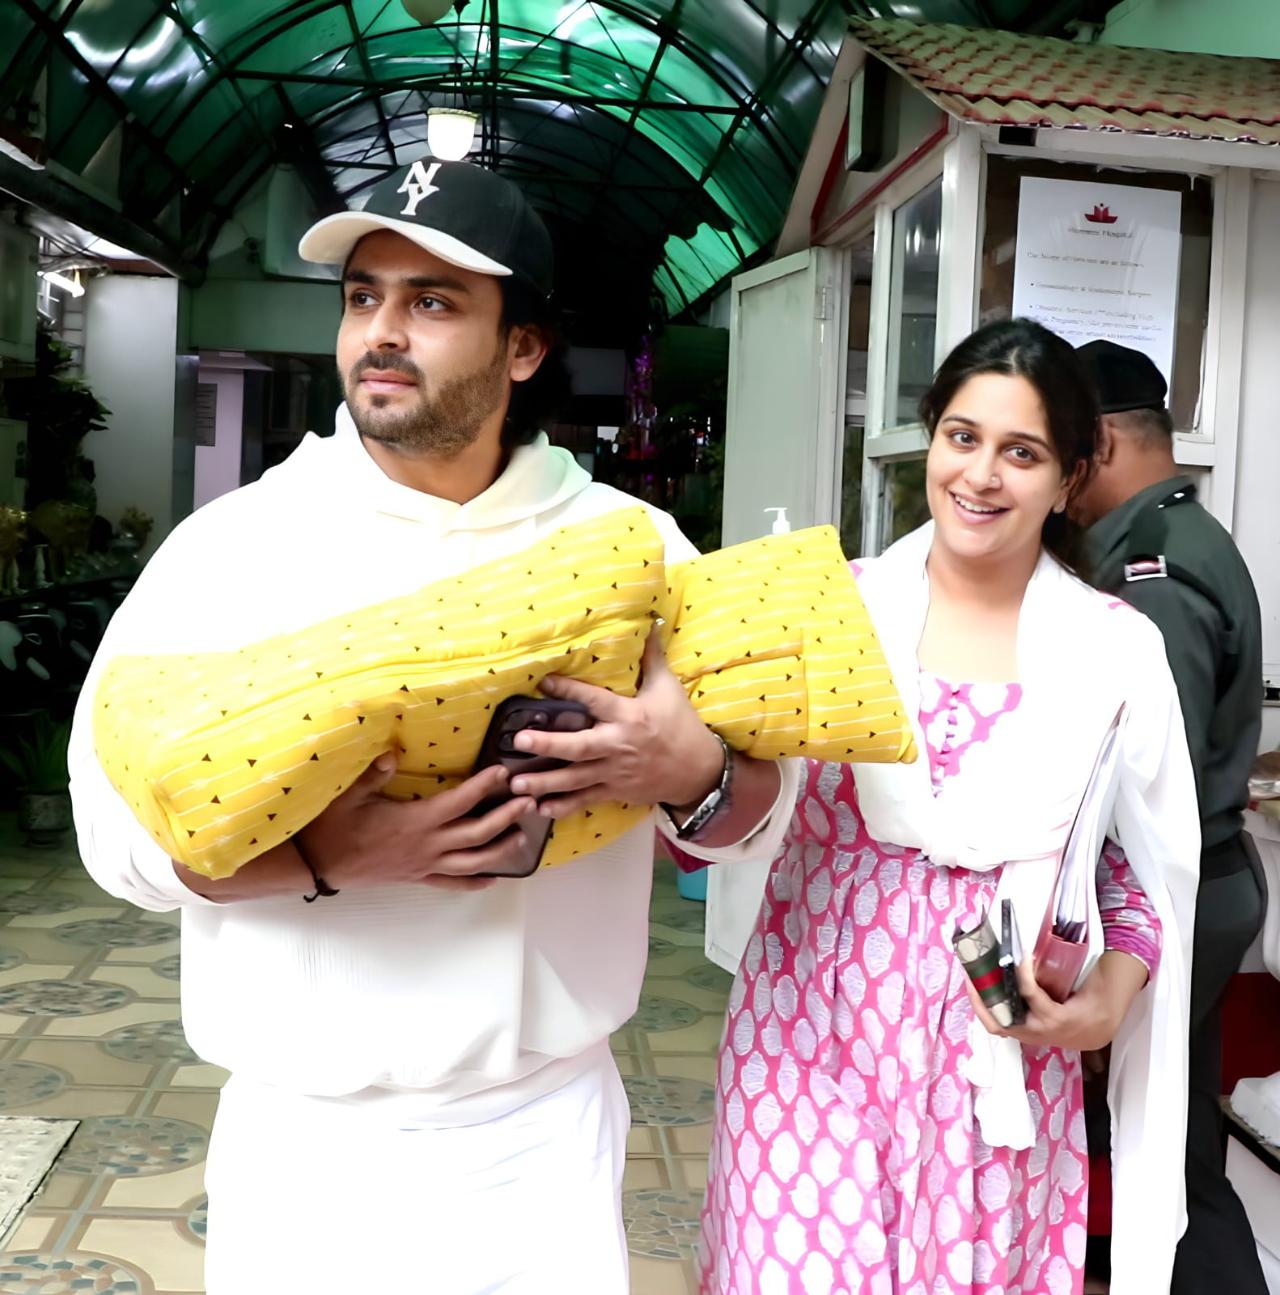 TV actress Dipika Kakar and her husband Shoaib Ibrahim were spotted in the city with their newborn as they took the baby boy for a check-up